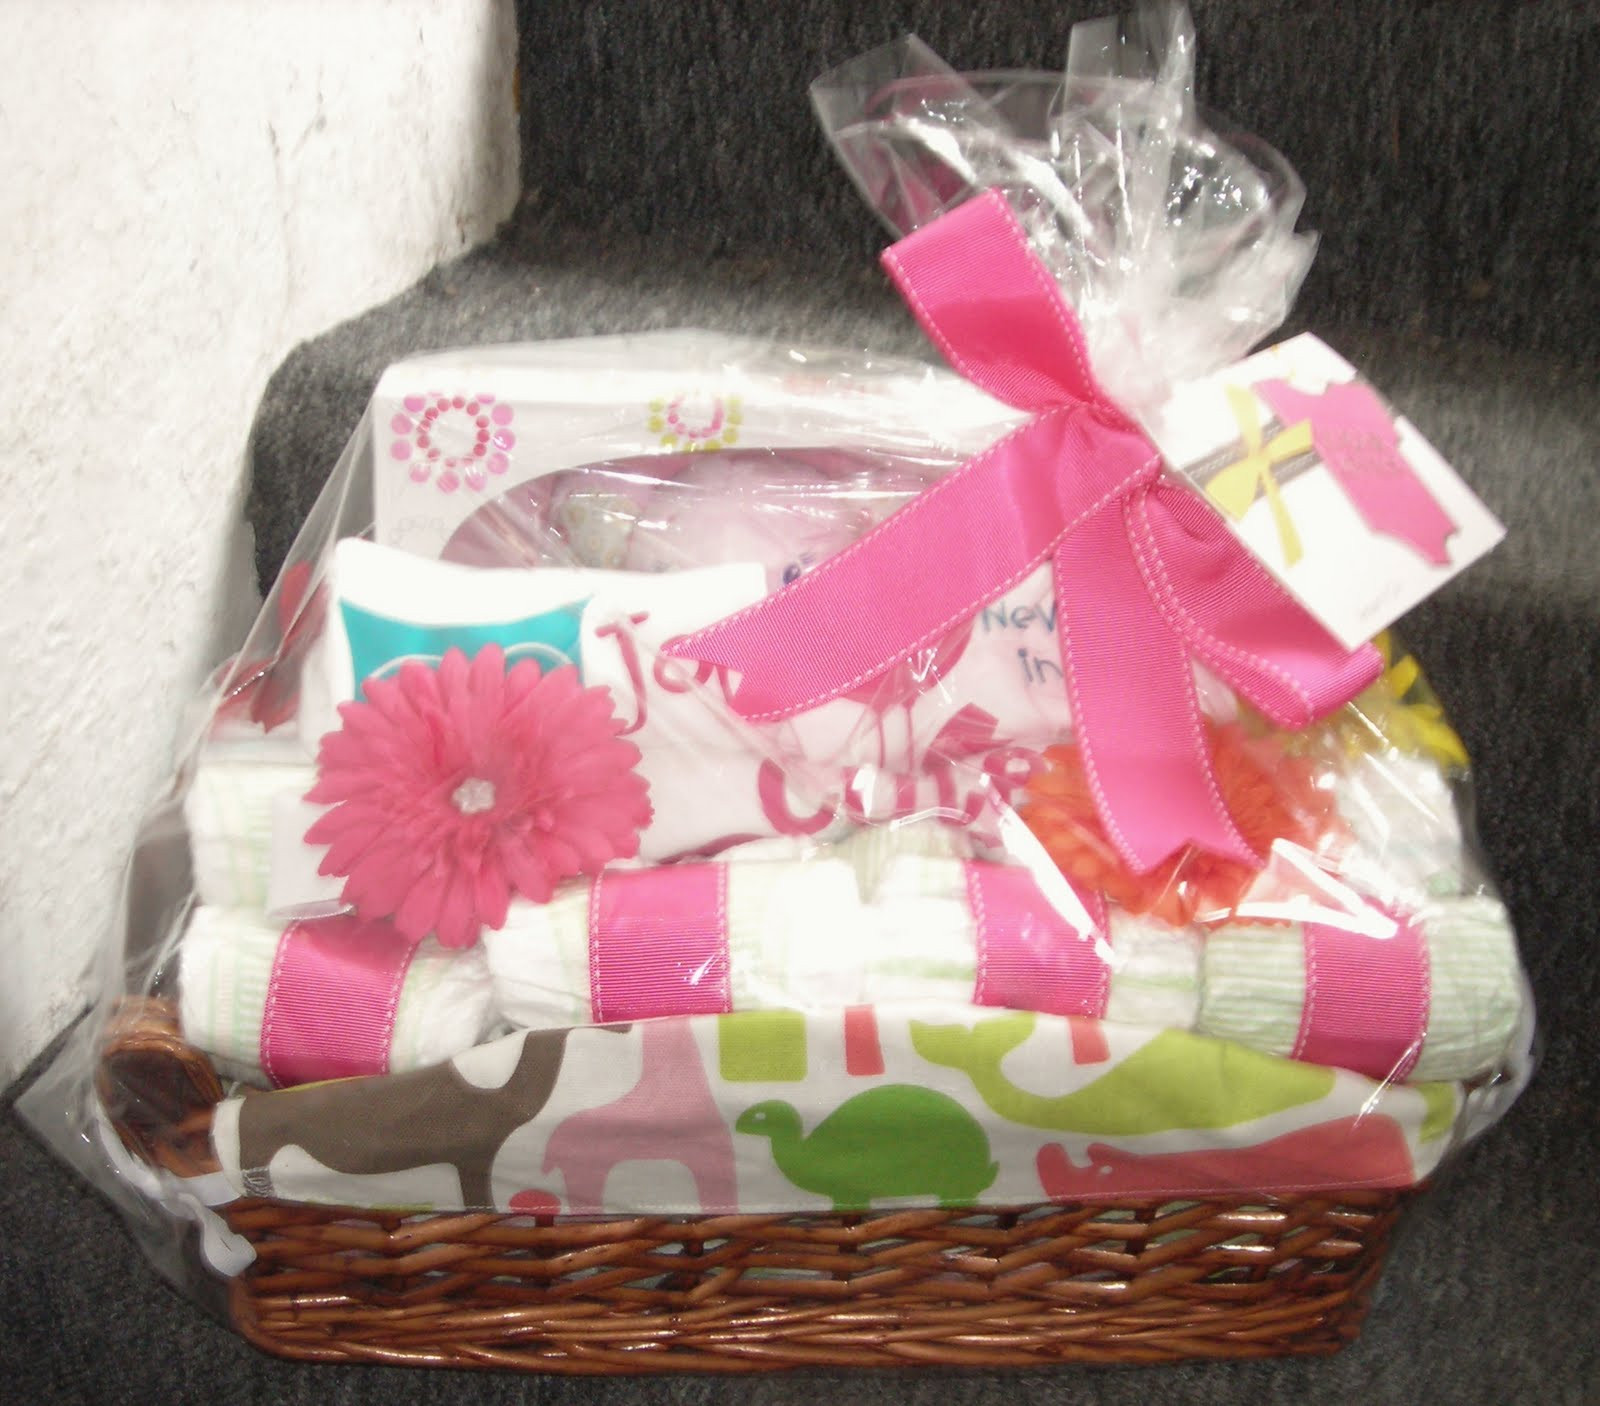 Gift Ideas For A Baby Girl
 Life in the Motherhood Baby Shower Gift Basket For a